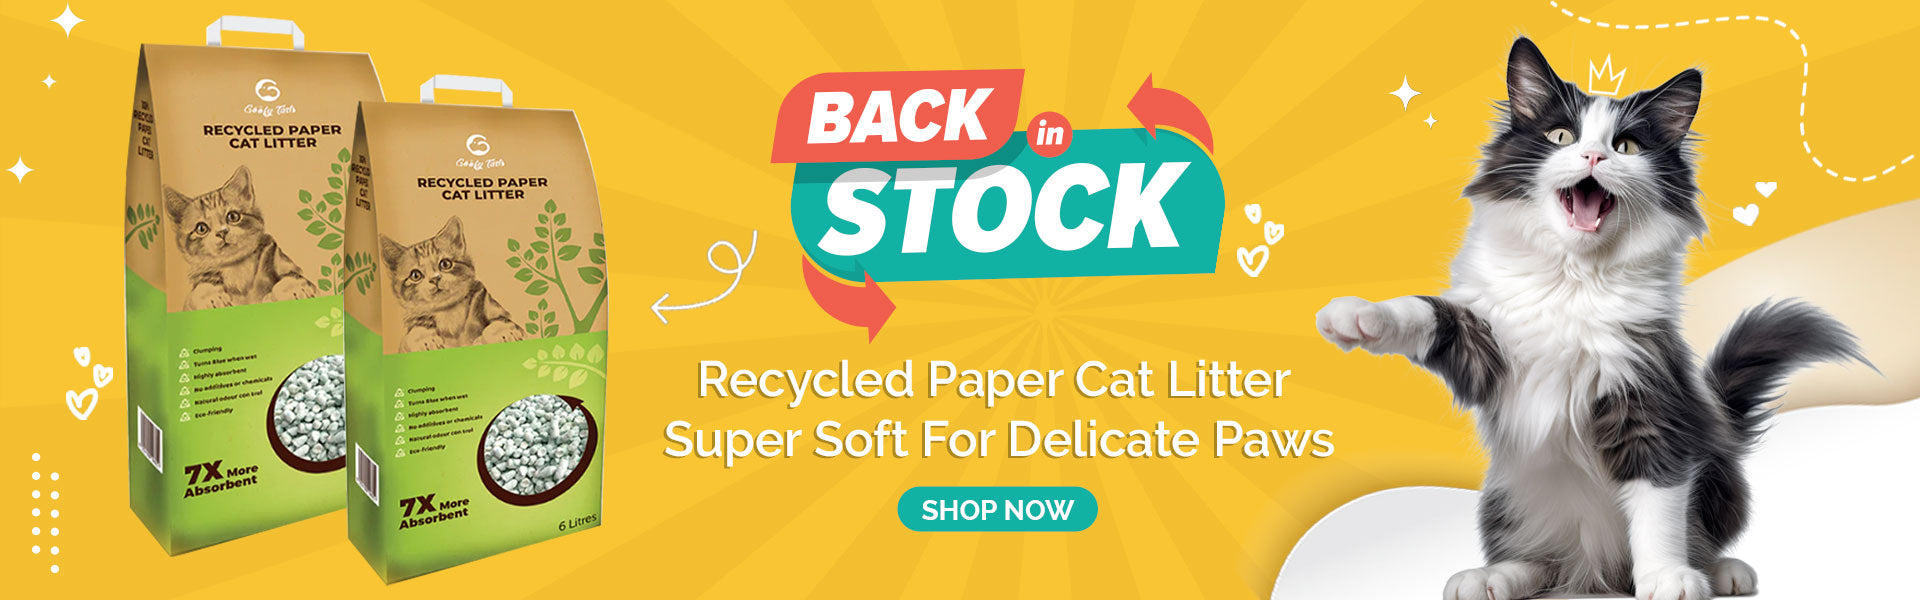 Recycled paper at litter is back in stock web banner from goofytails.com